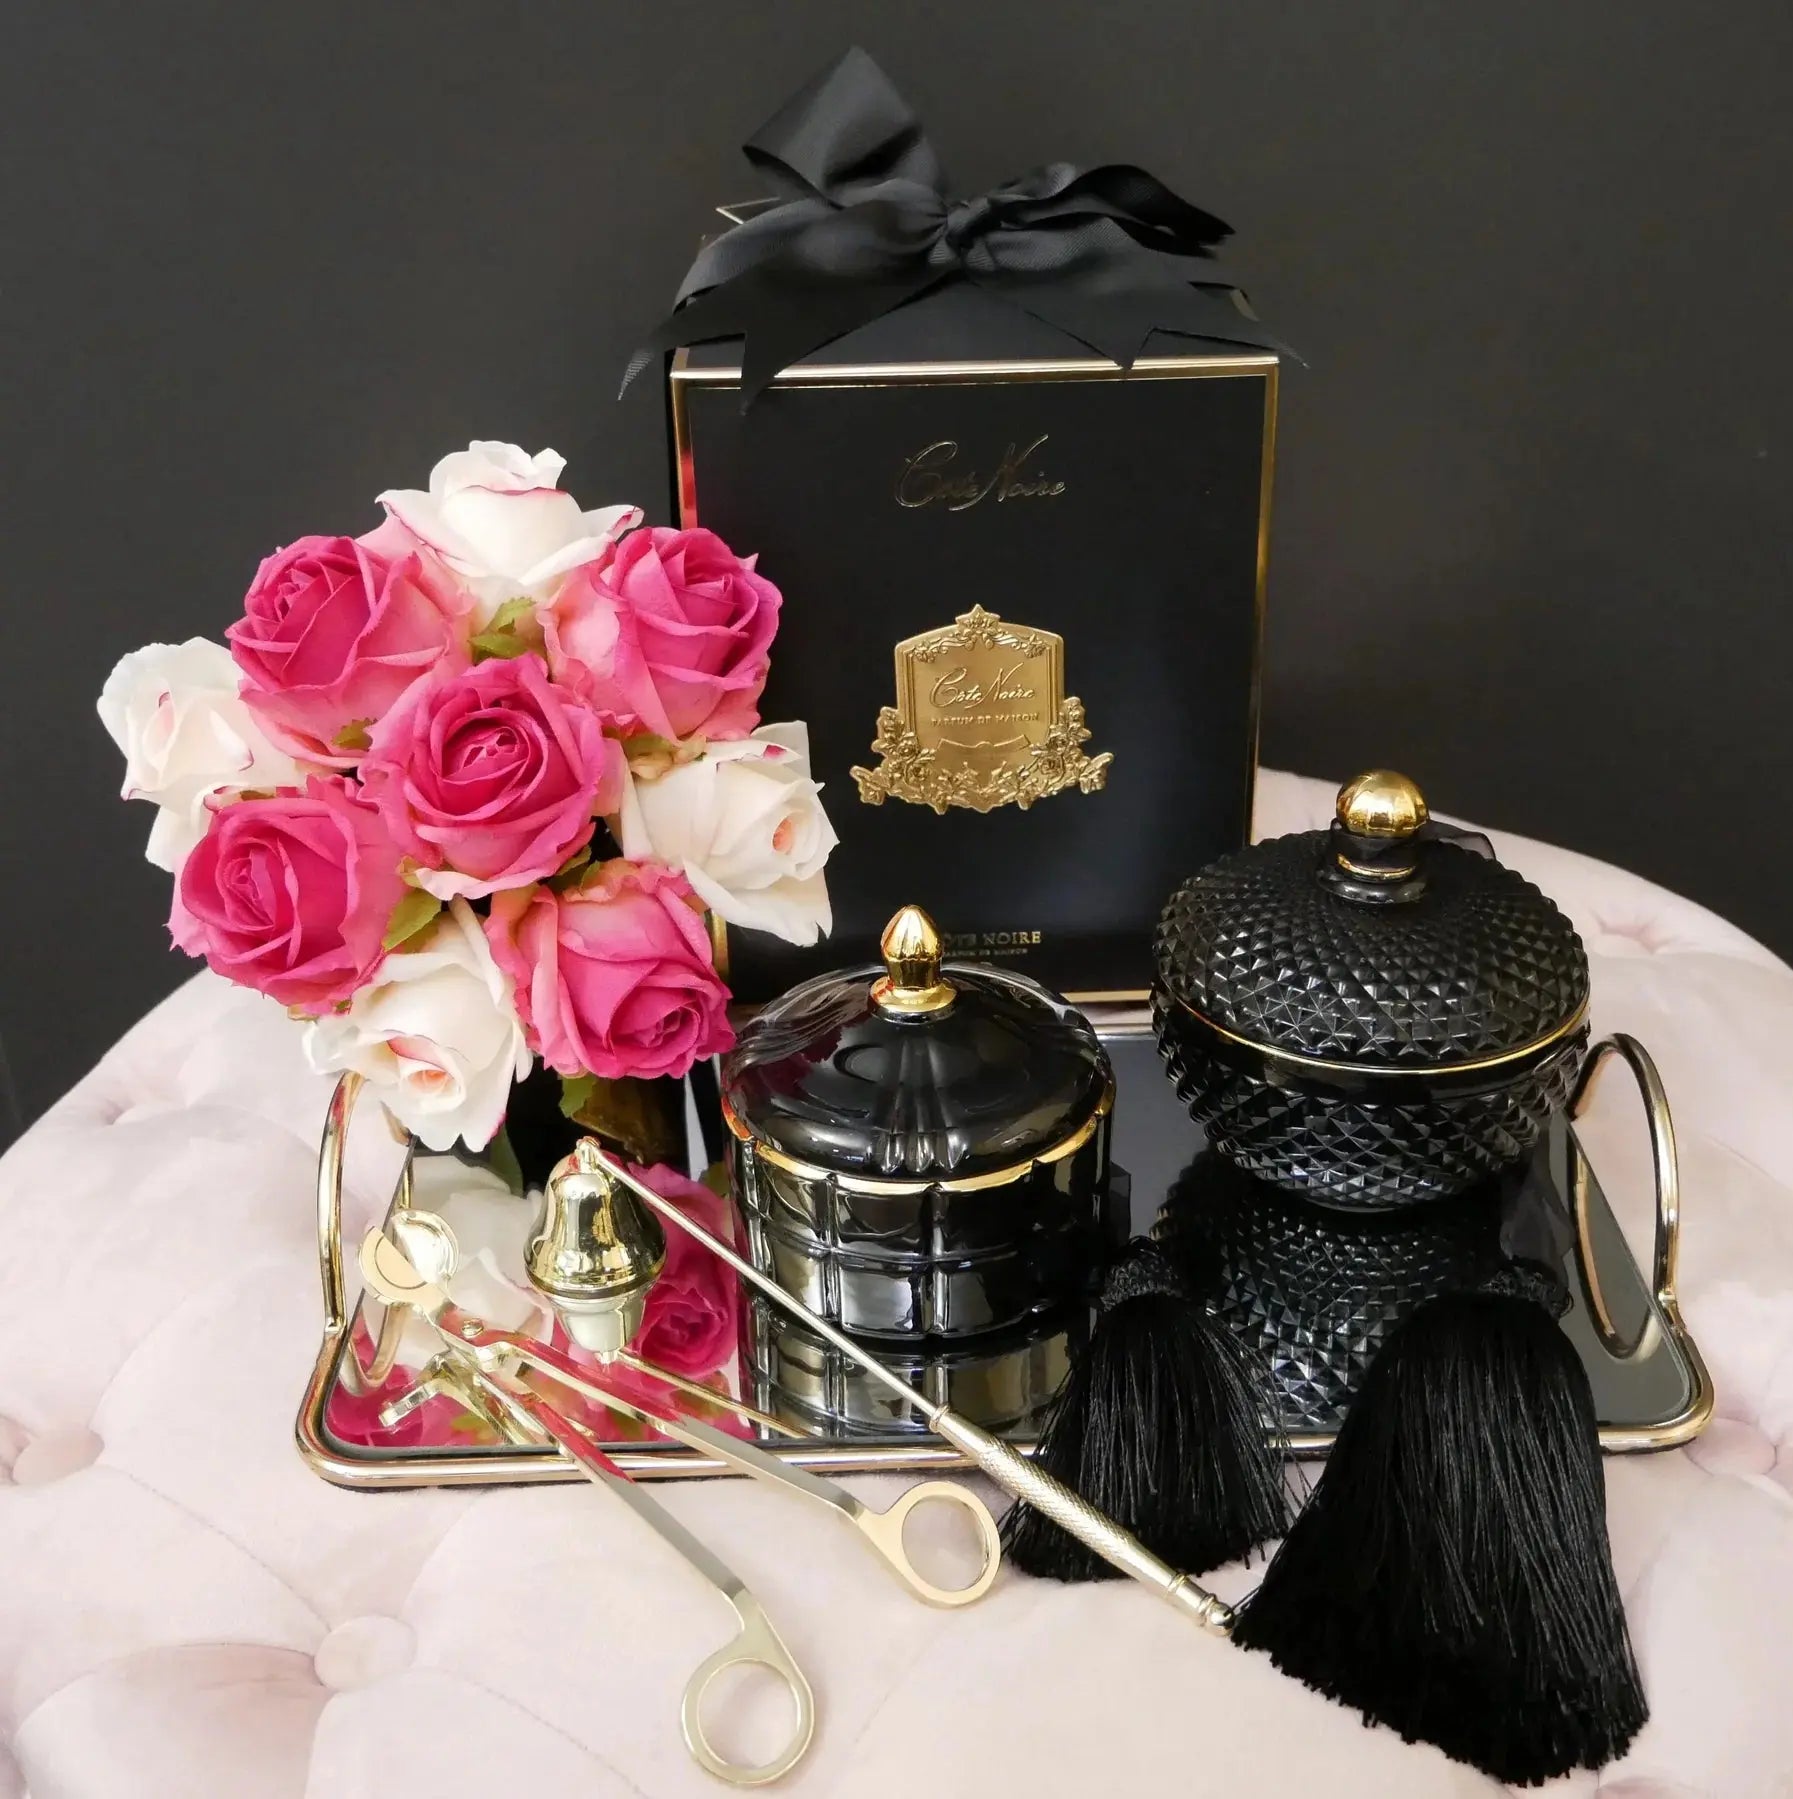 The image presents a beautifully arranged product display featuring luxury candles and decorative elements. Two round, textured candles with golden accents and long black tassels are displayed, one in black and the other in a dark charcoal. They are set on a mirrored tray beside a bouquet of vibrant pink and white roses held in a golden holder, adding a fresh and elegant touch to the arrangement. In the background, there is a dark blue box with a golden emblem and a black ribbon.